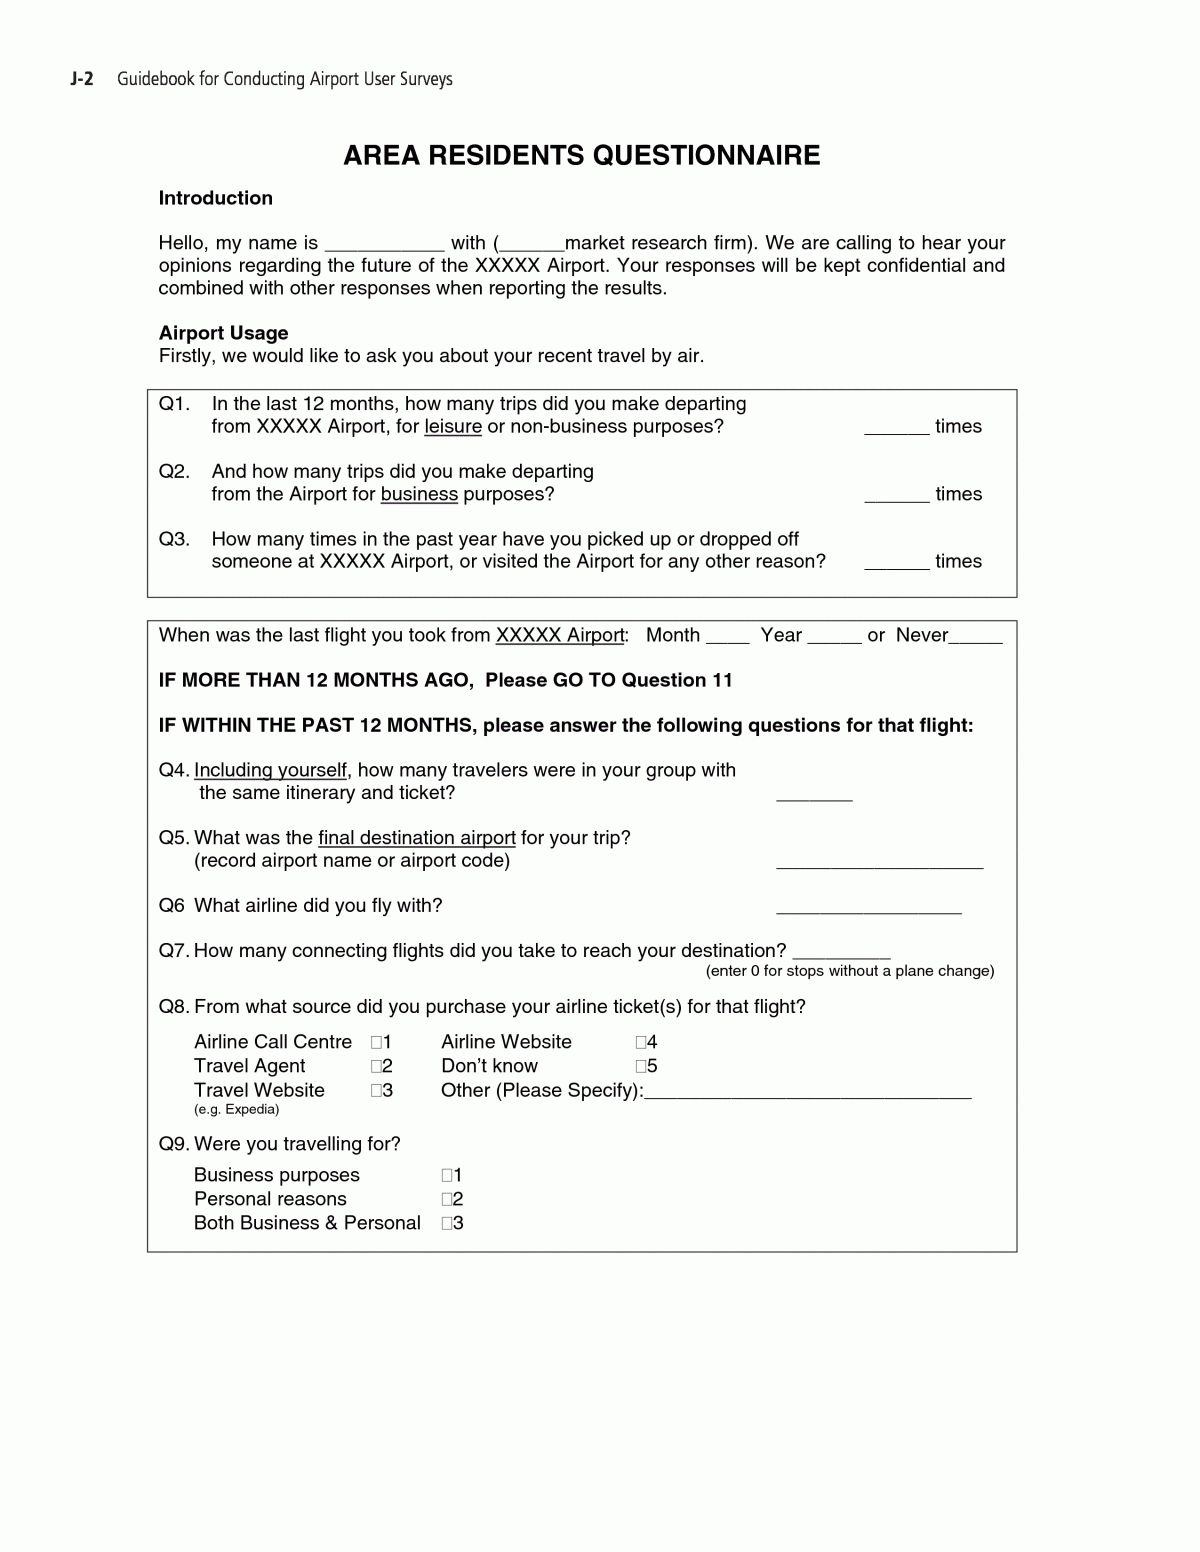 Sample Questionnaire Design Template - Veppe With Questionnaire Design Template Word